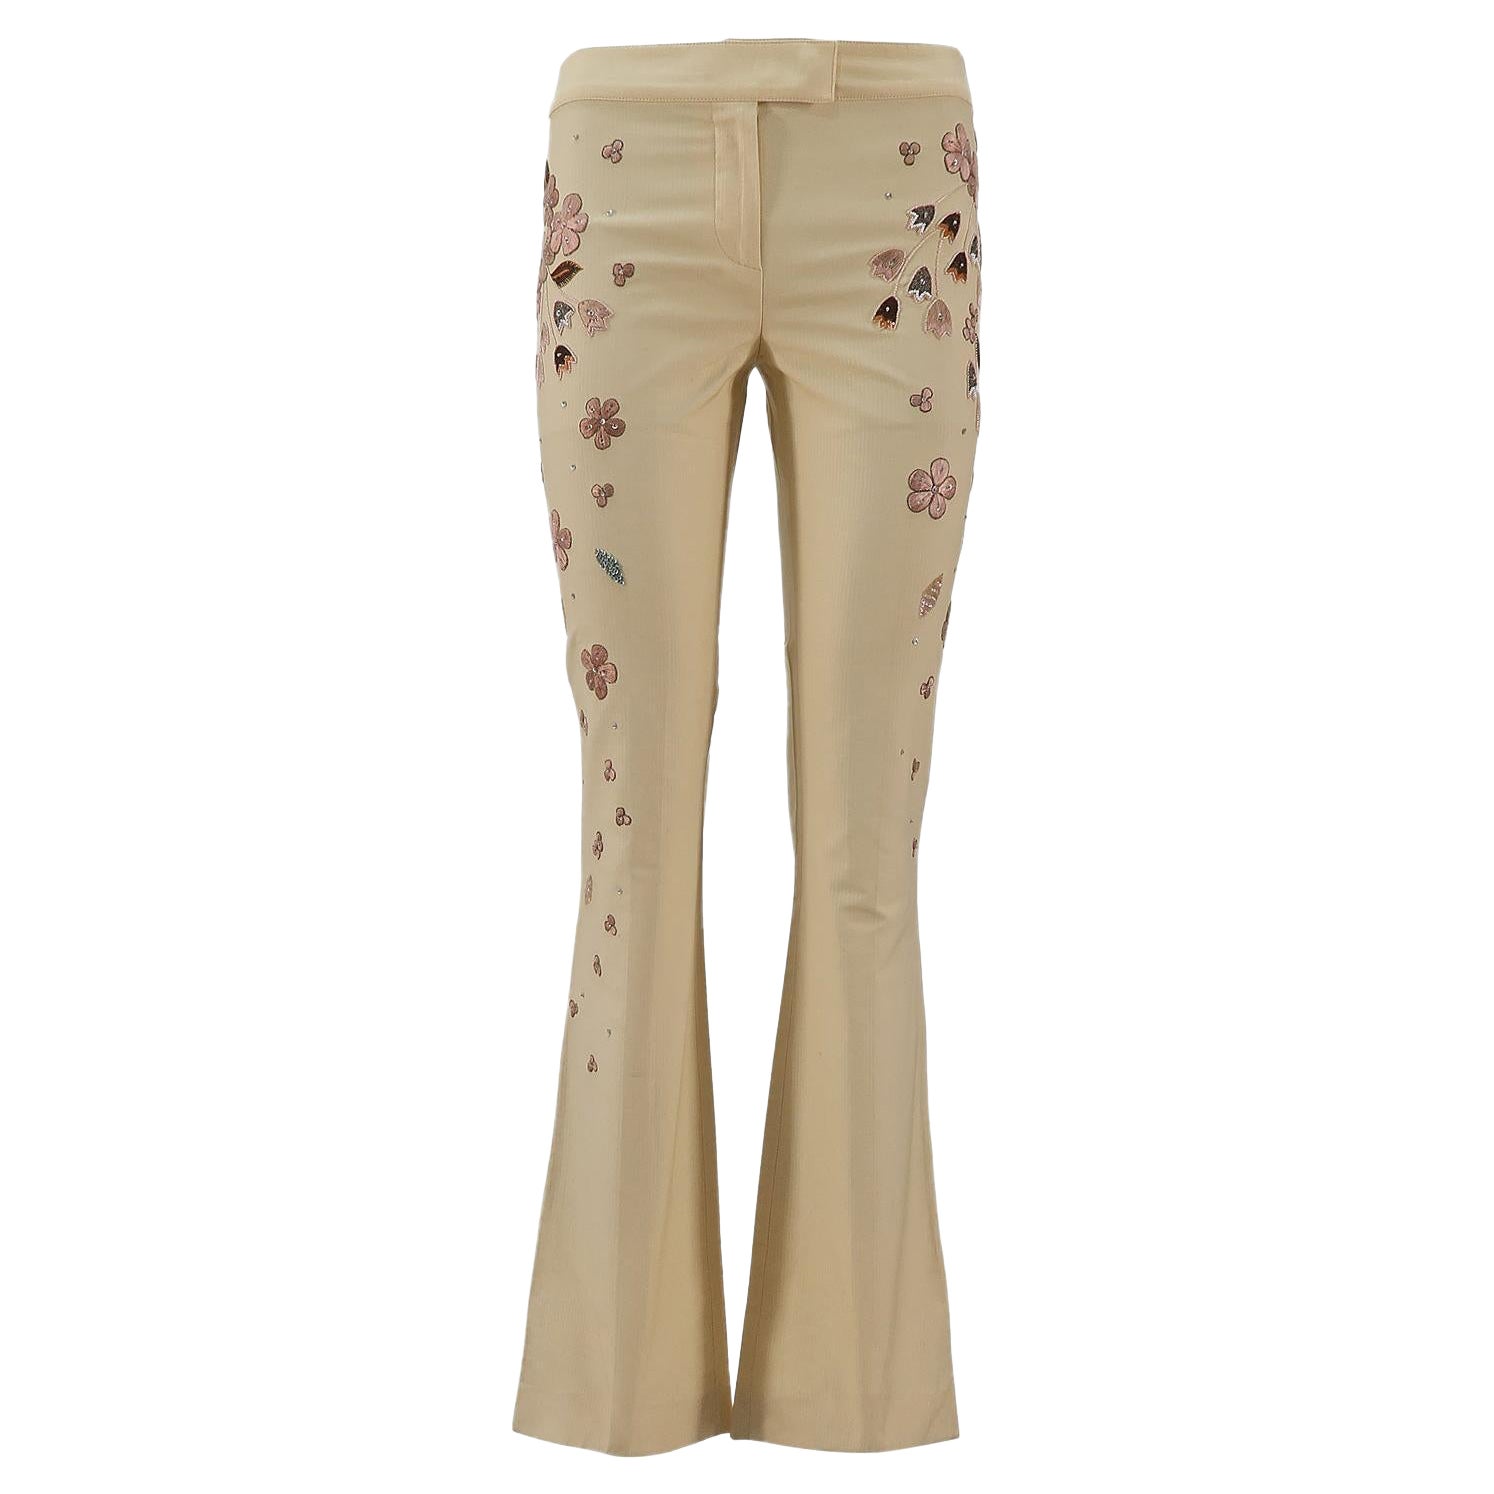 John Galliano 2000s Embroidered Cotton Flared Pants